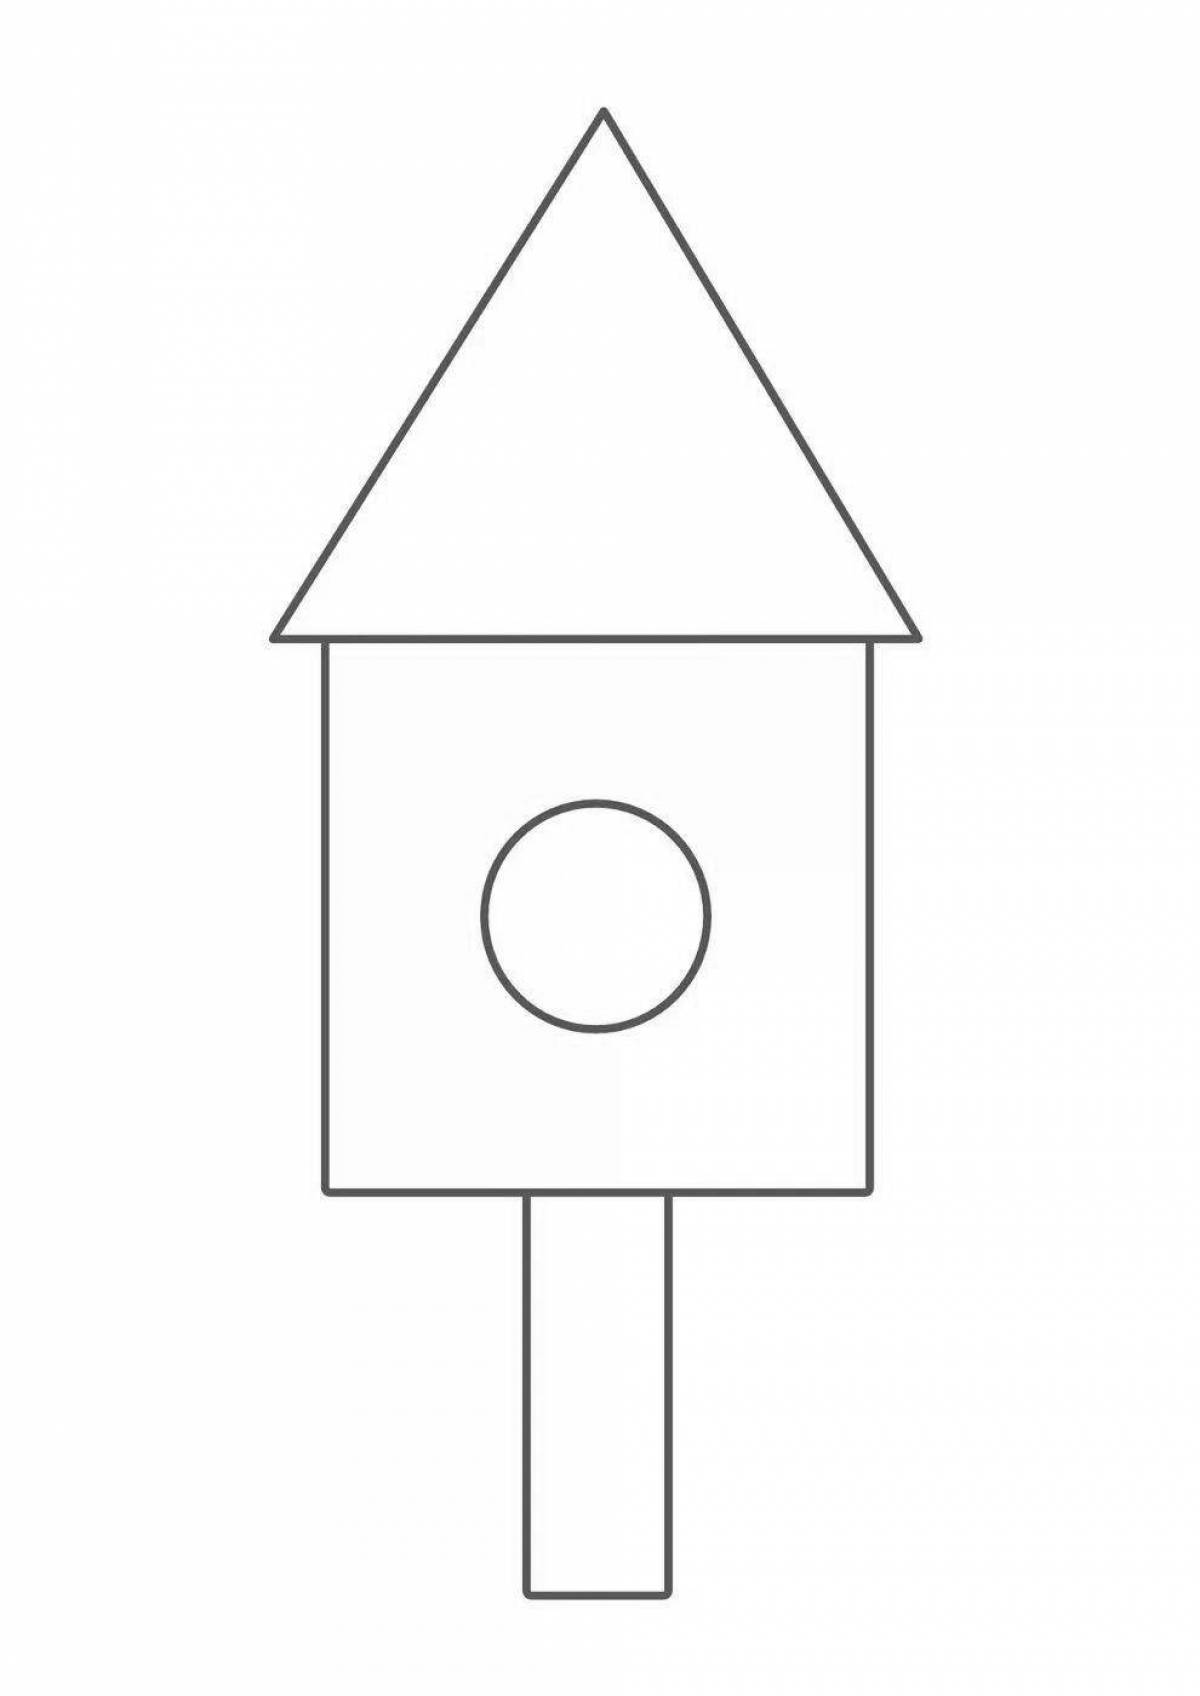 Coloring page of complex geometric house